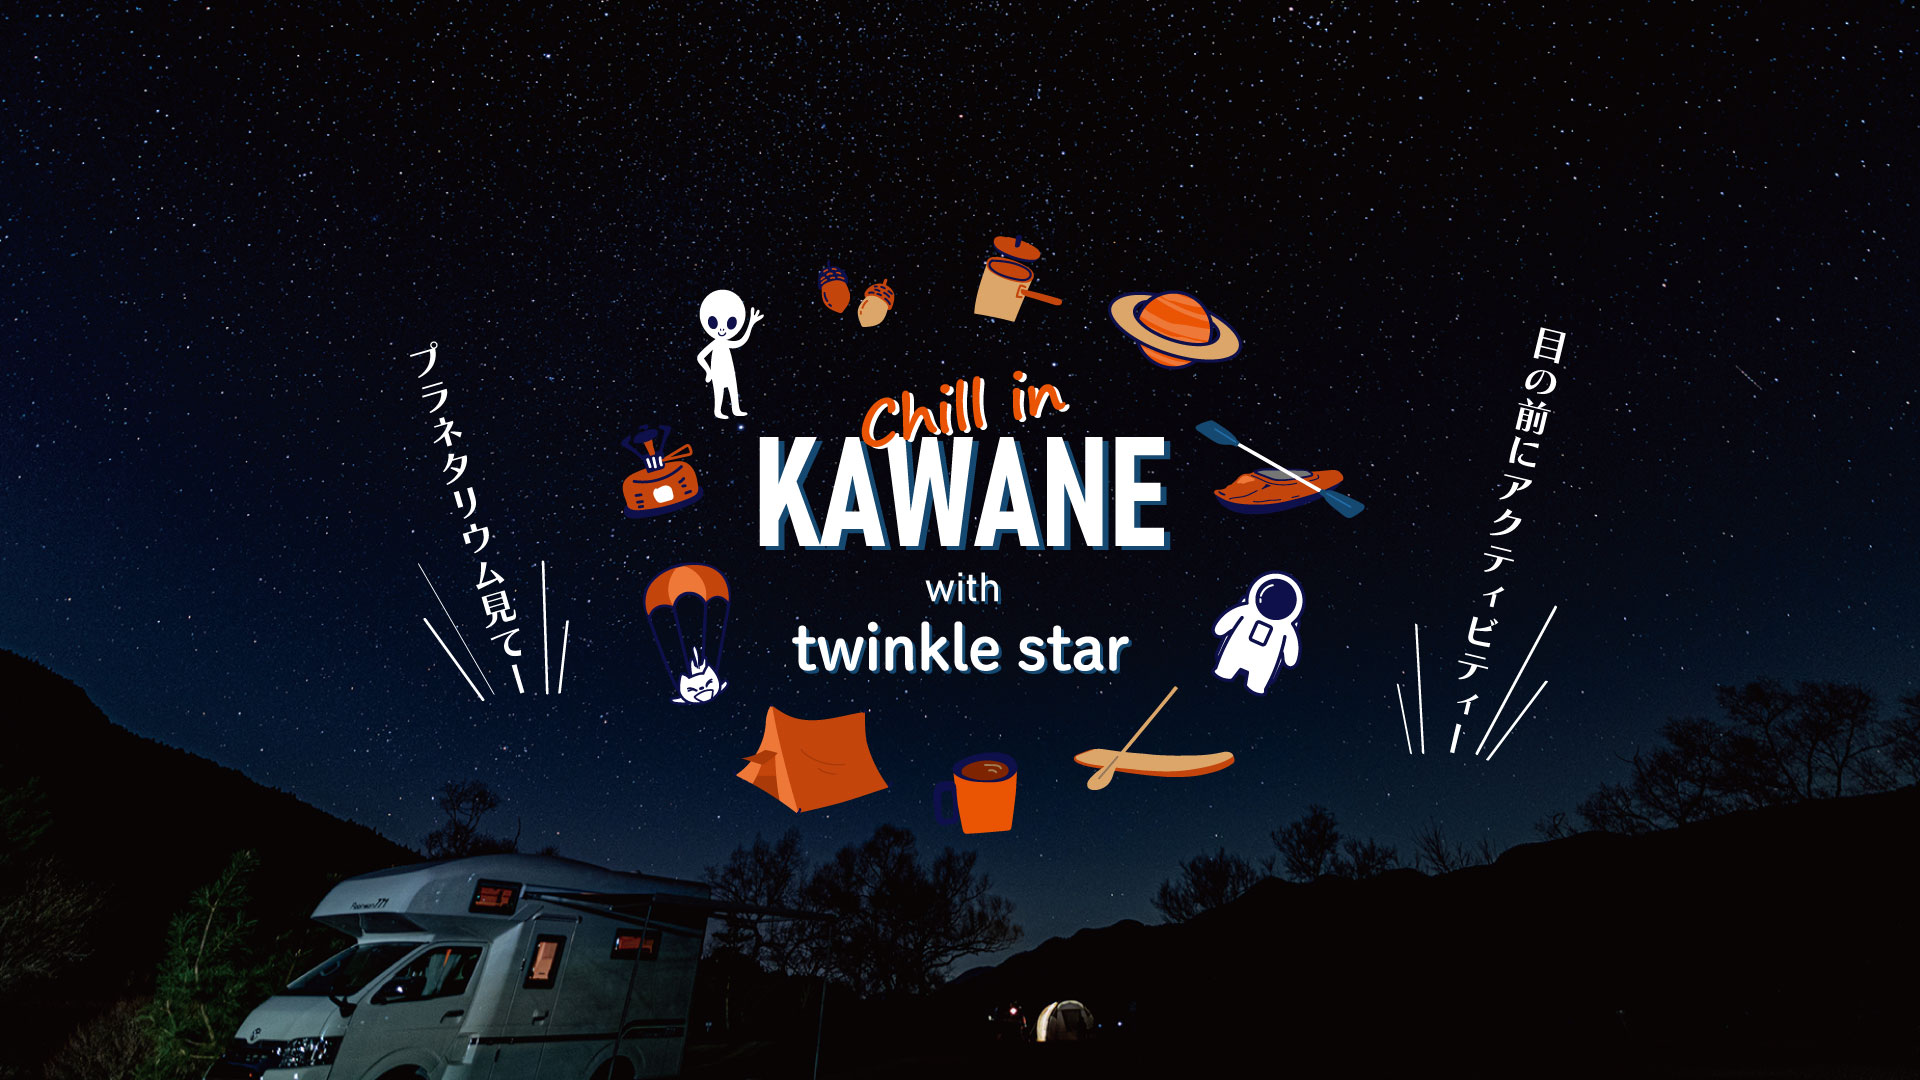 Chill in KAWANE with twinkle star